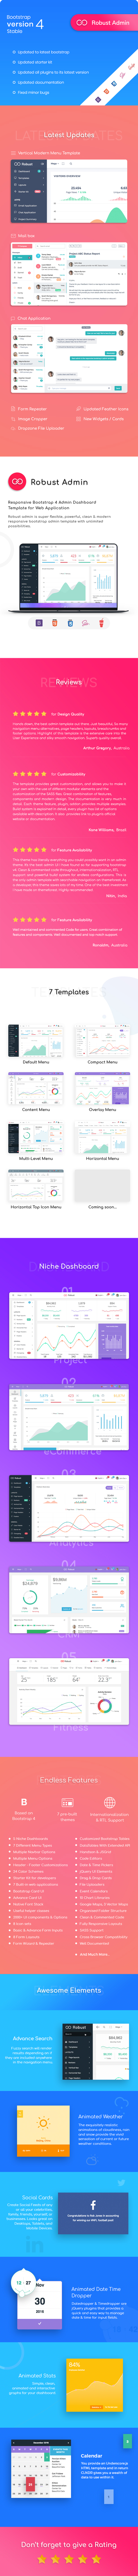 oywSEjf - Robust - Premium Bootstrap 4 Admin, Dashboard & WebApp Kit Template